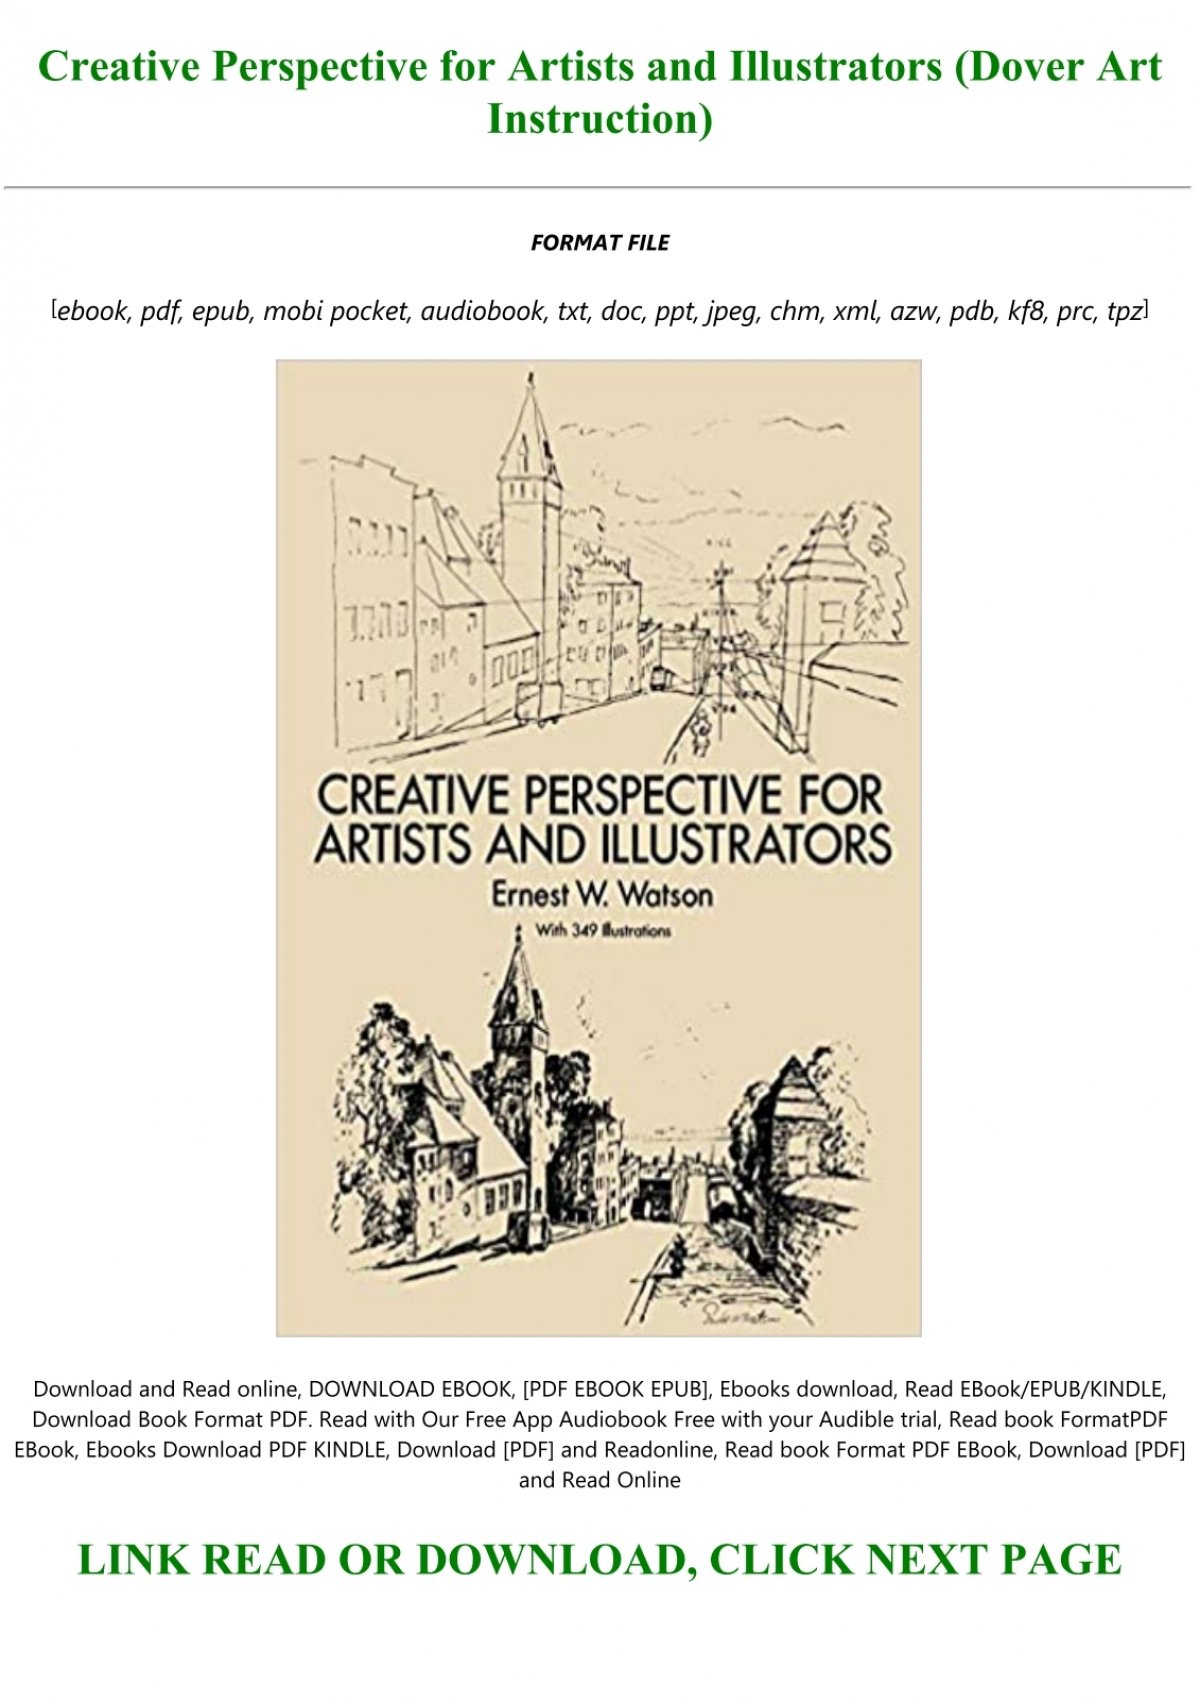 creative perspective for artists and illustrators pdf free download